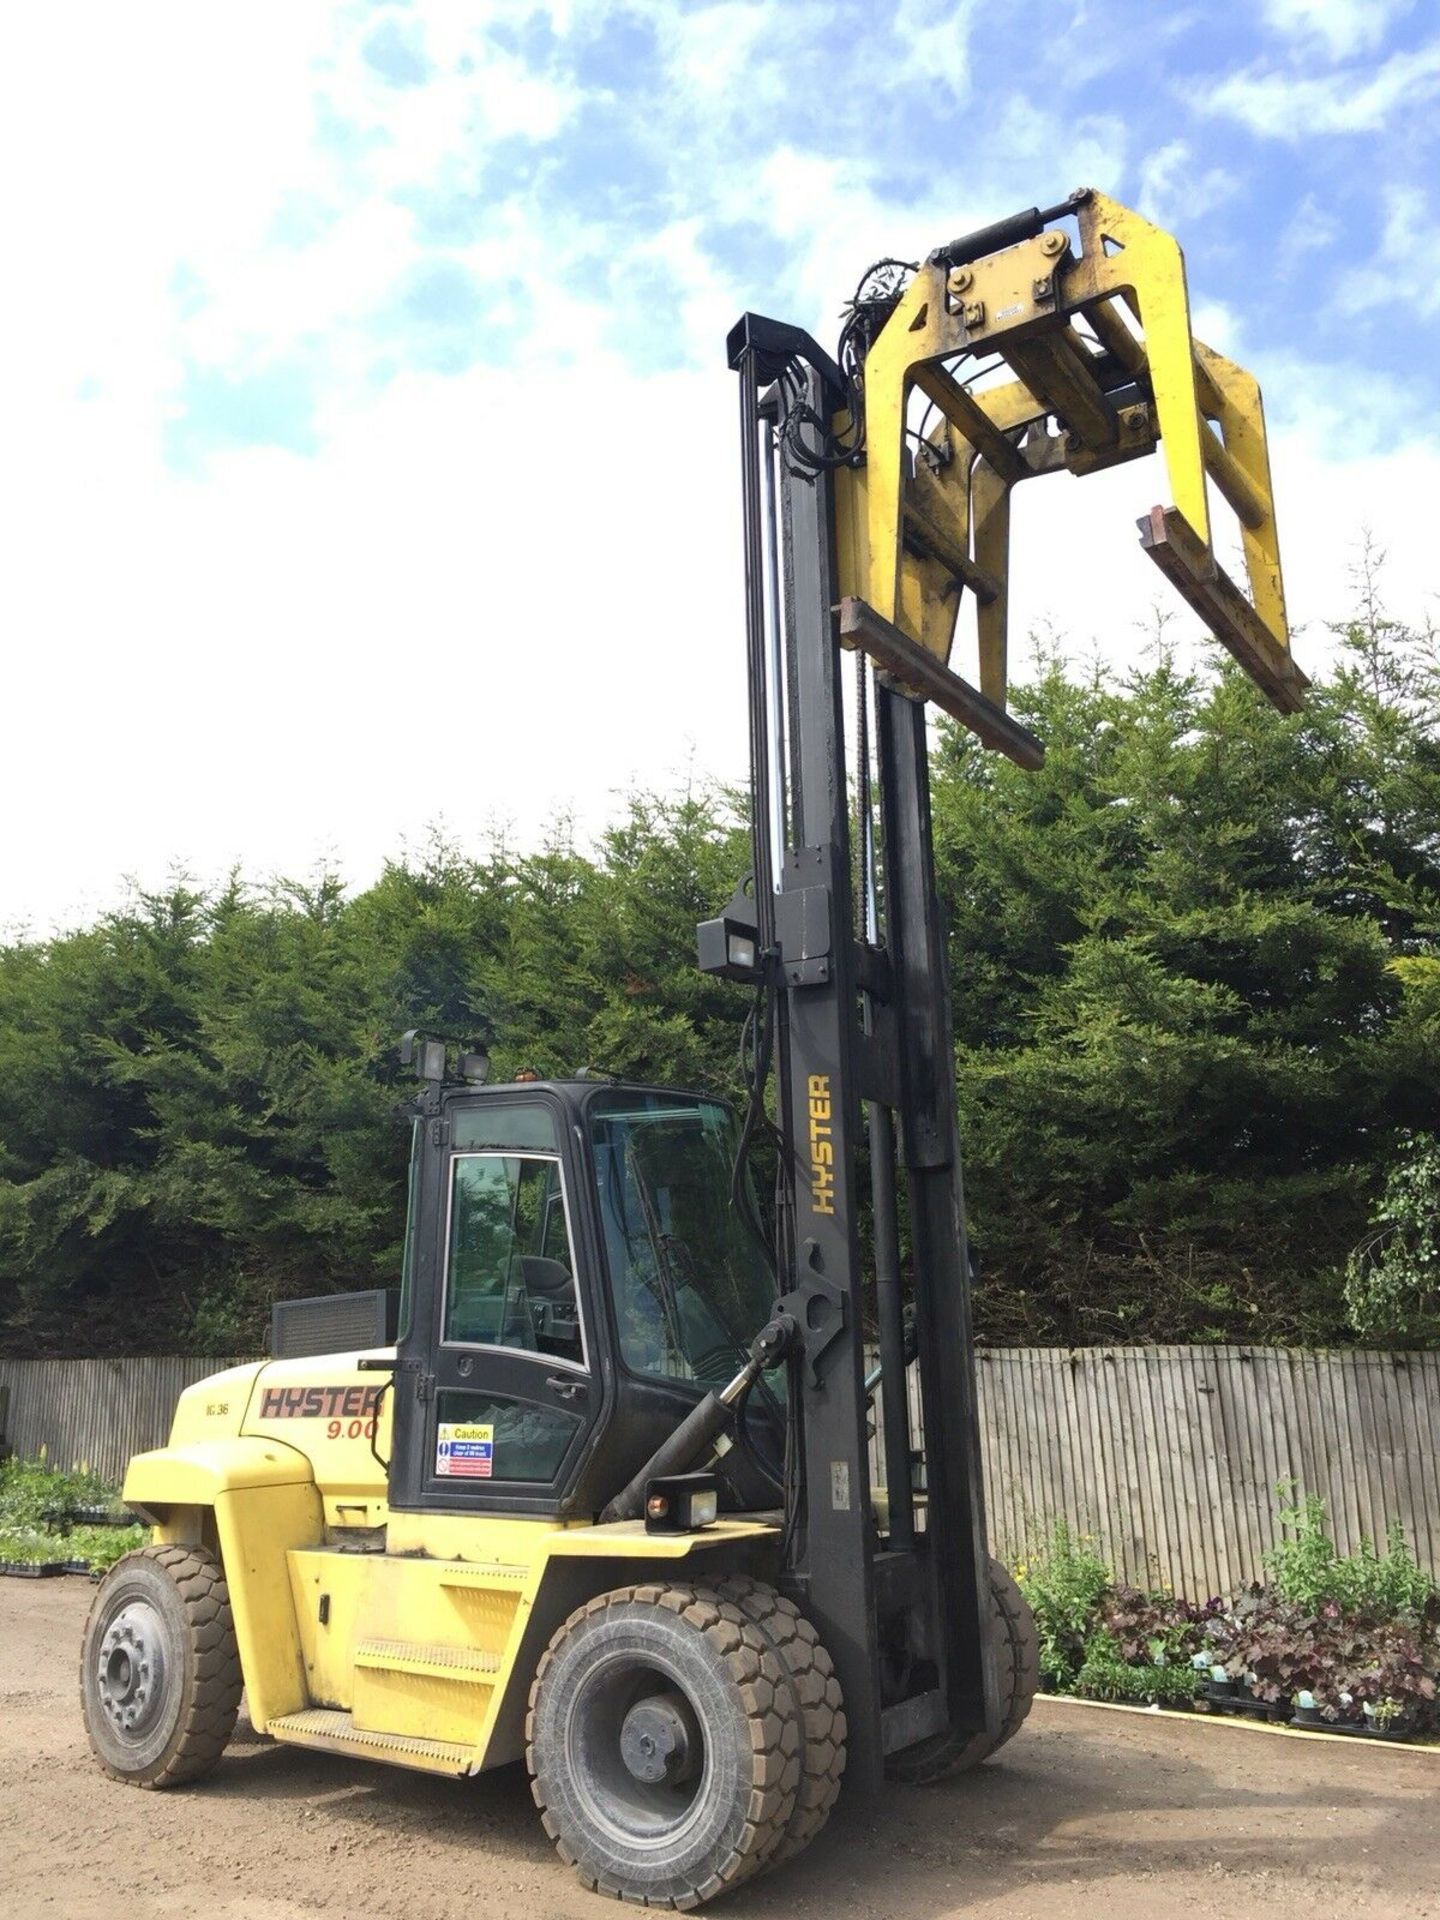 9 Ton Forklift Truck Hyster With Block Grab Attachment - Image 6 of 6